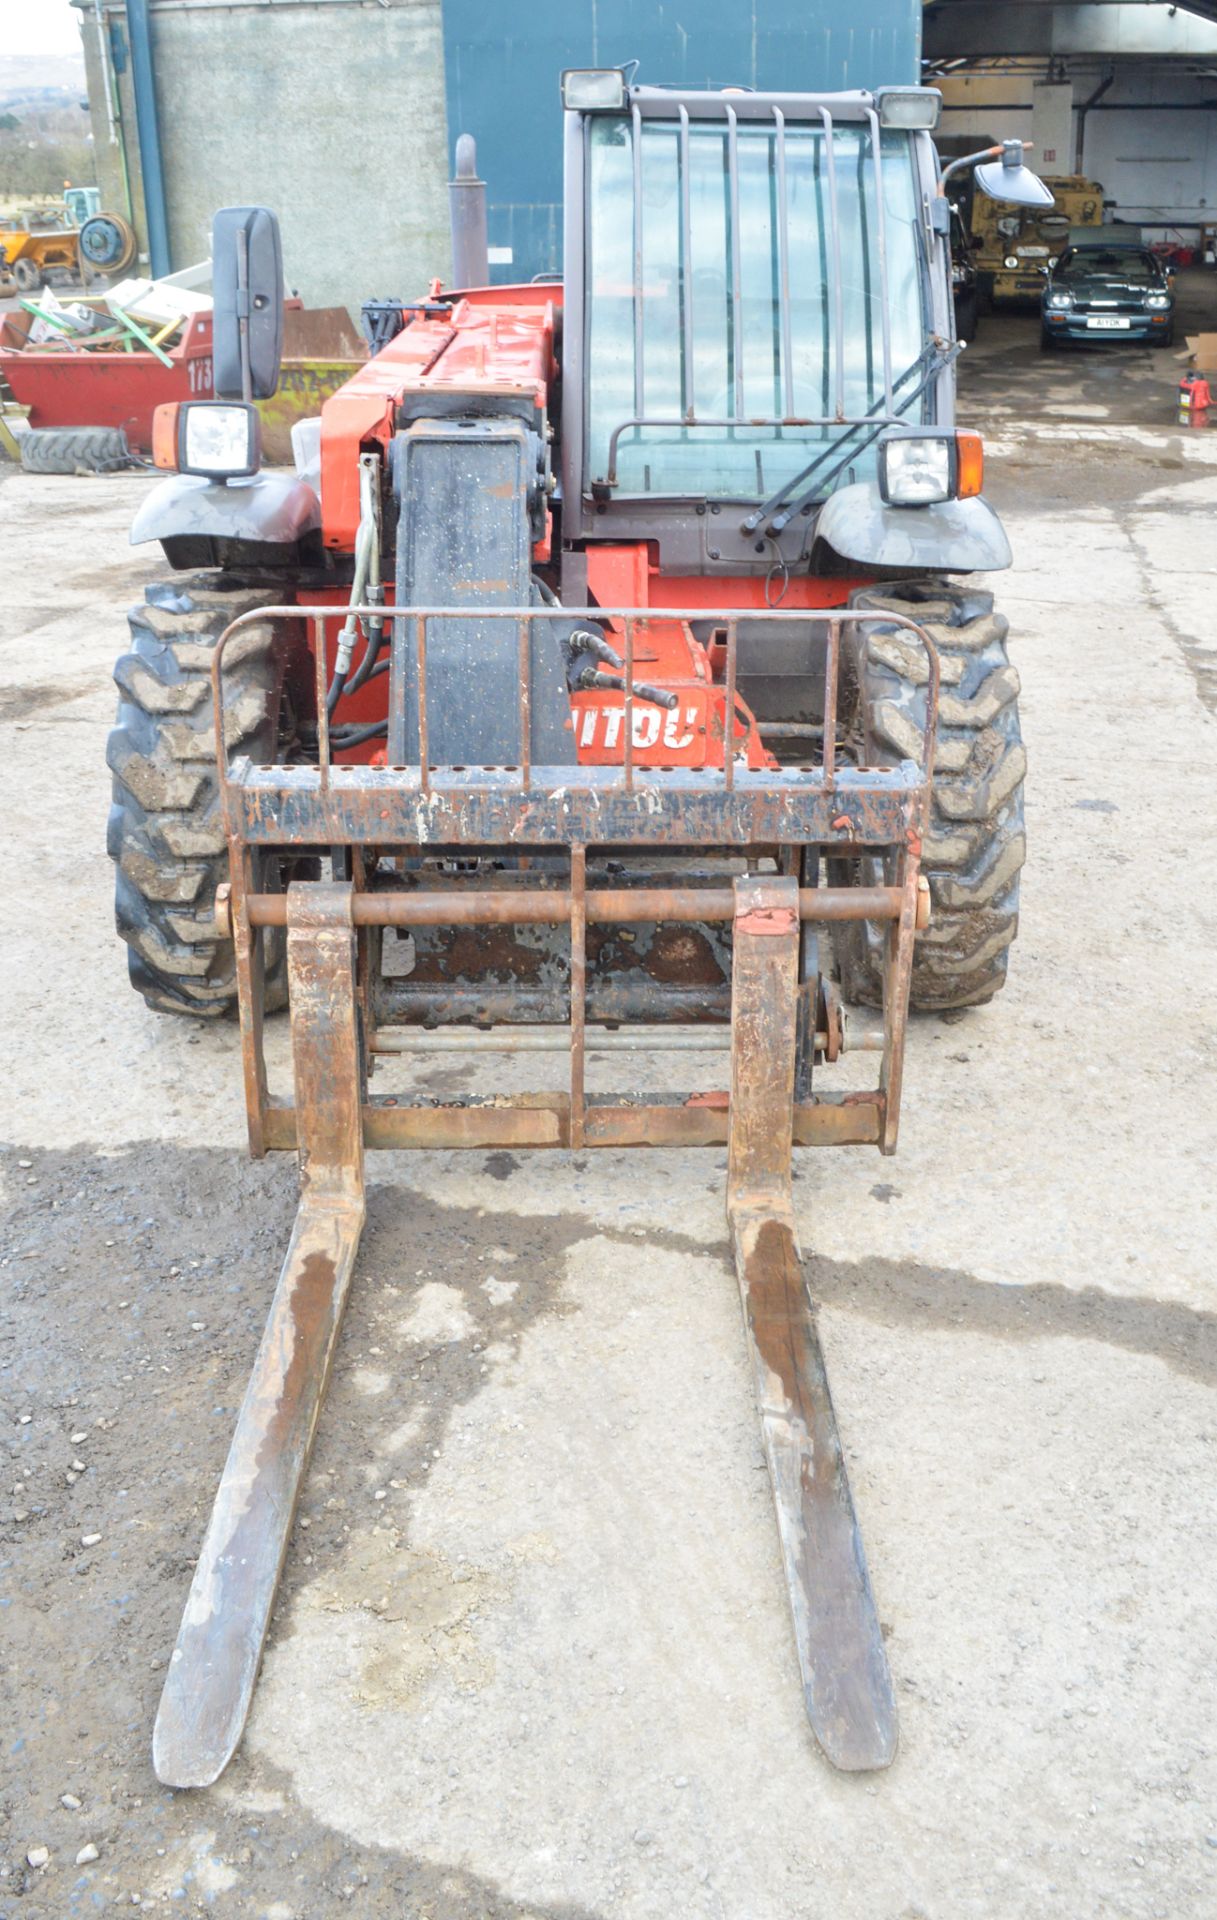 Manitou MT523 Turbo 5 metre telescopic handler Year: 2007 S/N: 245597 Recorded Hours: 4390 - Image 5 of 12